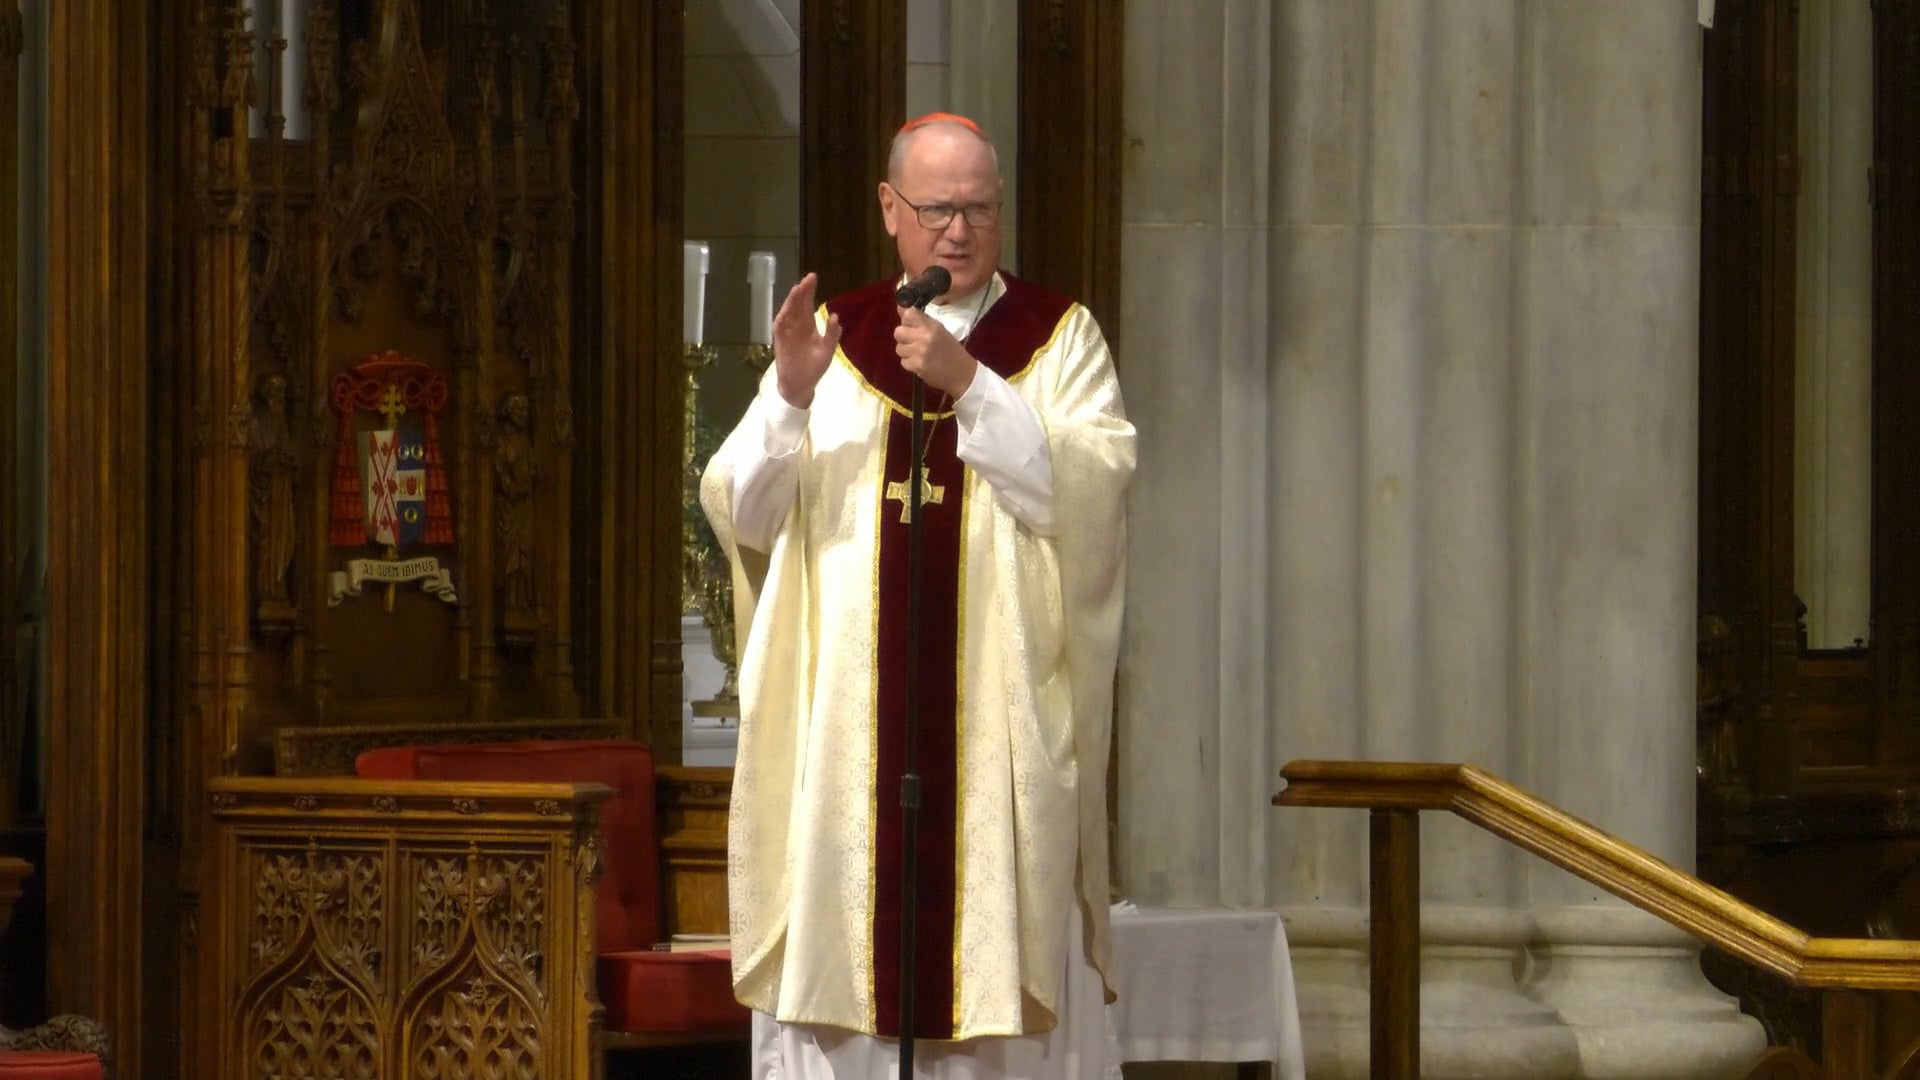 Mass from St. Patrick's Cathedral - January 31, 2023